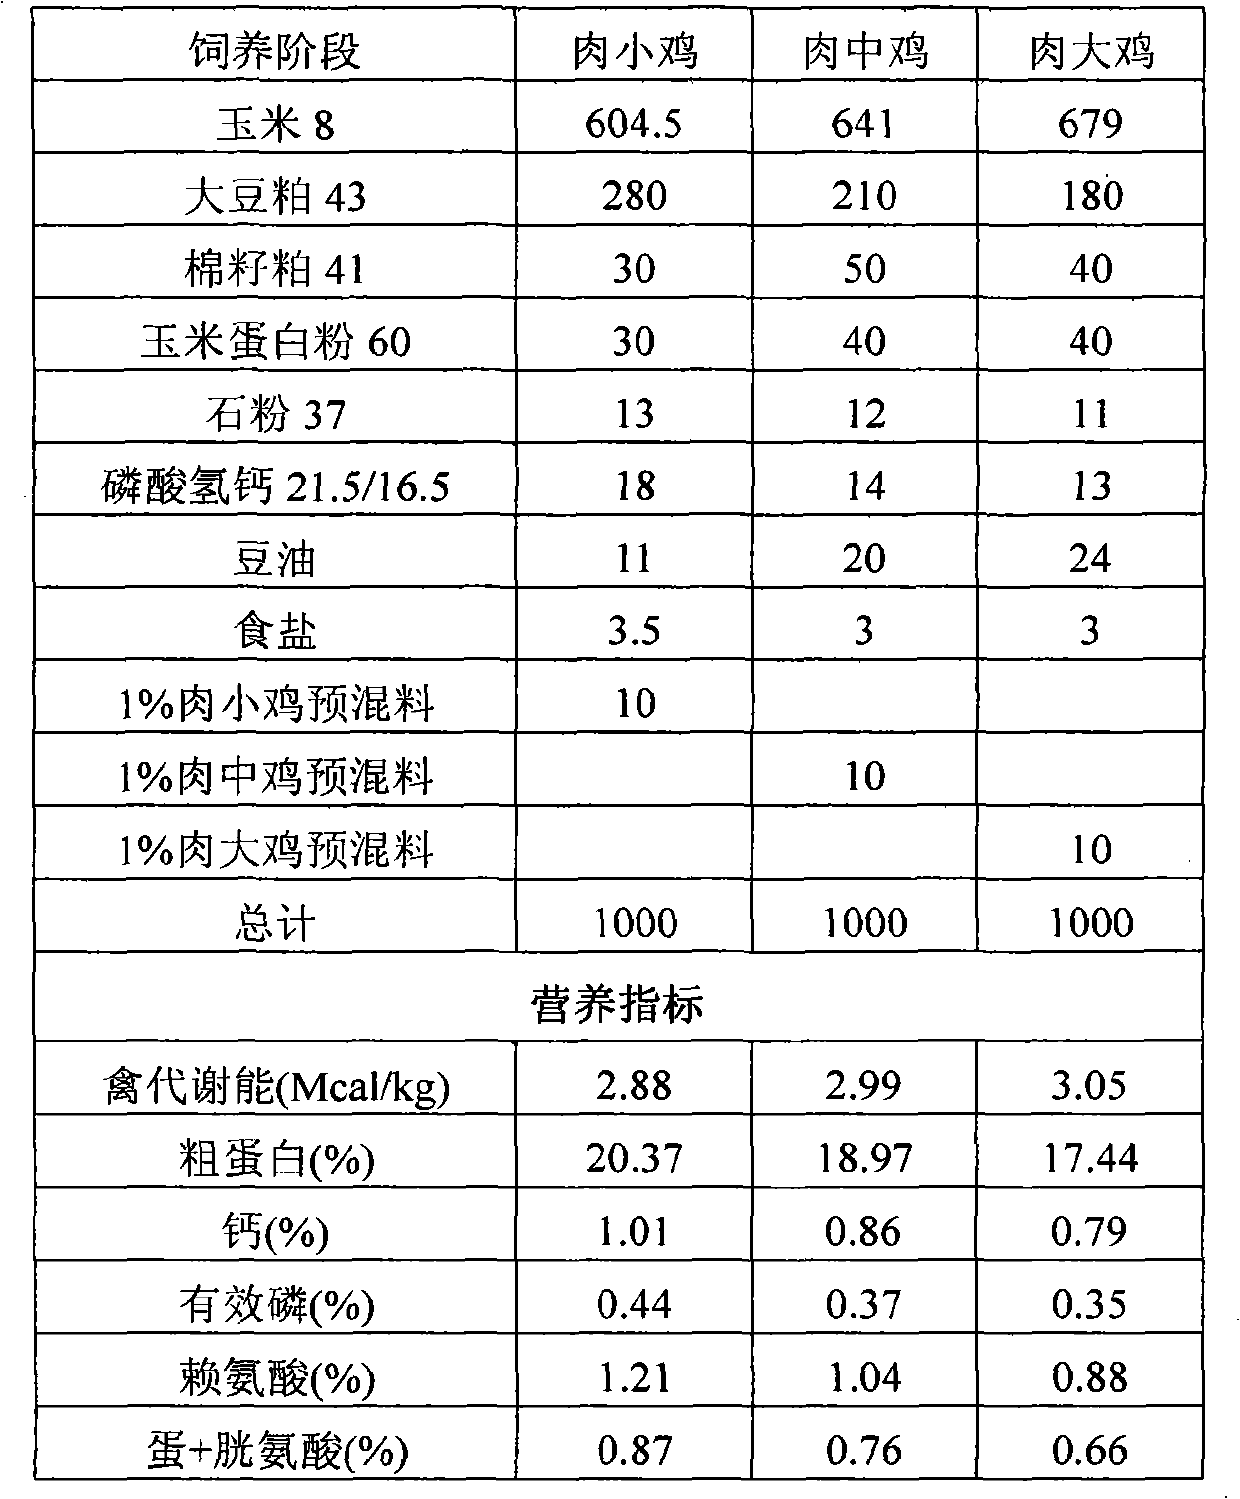 Micro-ecological traditional Chinese medicine preparation for enhancing immunity of livestock and poultry, and preparation method thereof